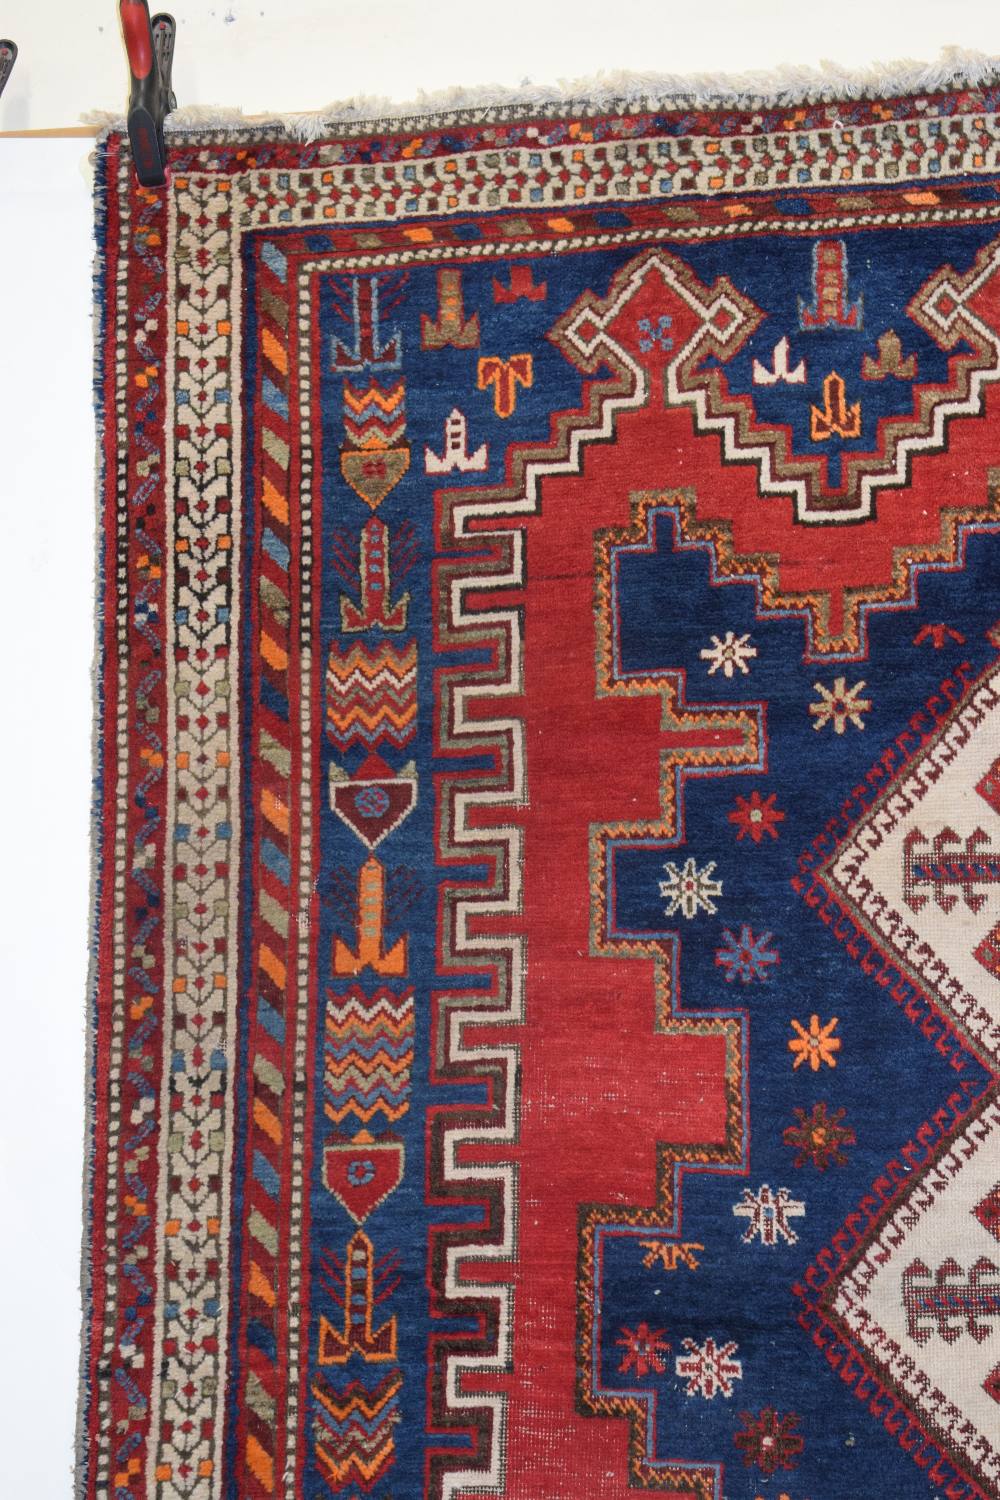 Afshar rug, Kerman area, south east Persia, circa 1930s-40s, 6ft. 8in. X 5ft. 1in. 2.03m. X 1.55m. - Image 4 of 9